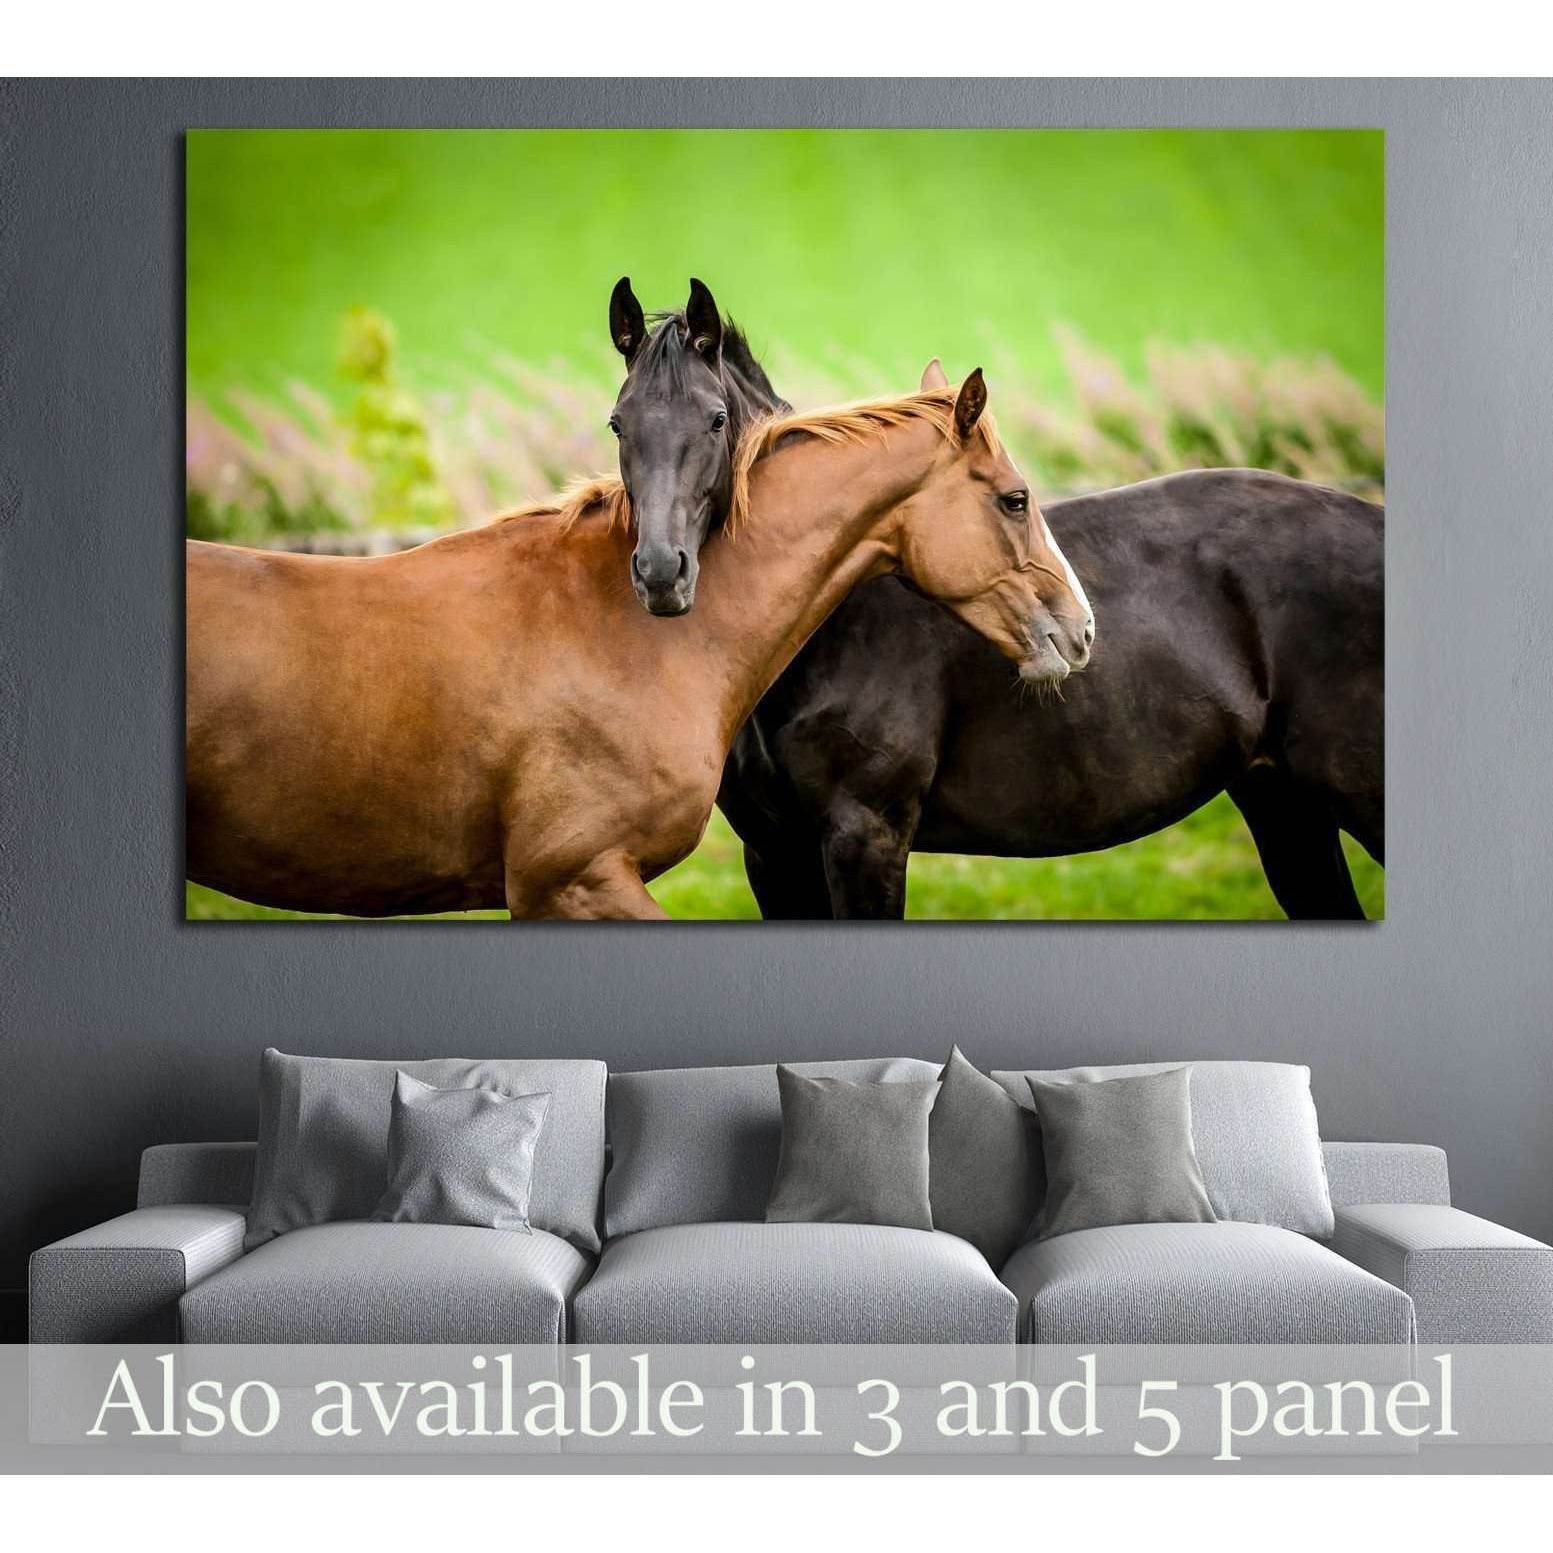 Two horses embracing in friendship №1853 Ready to Hang Canvas Print